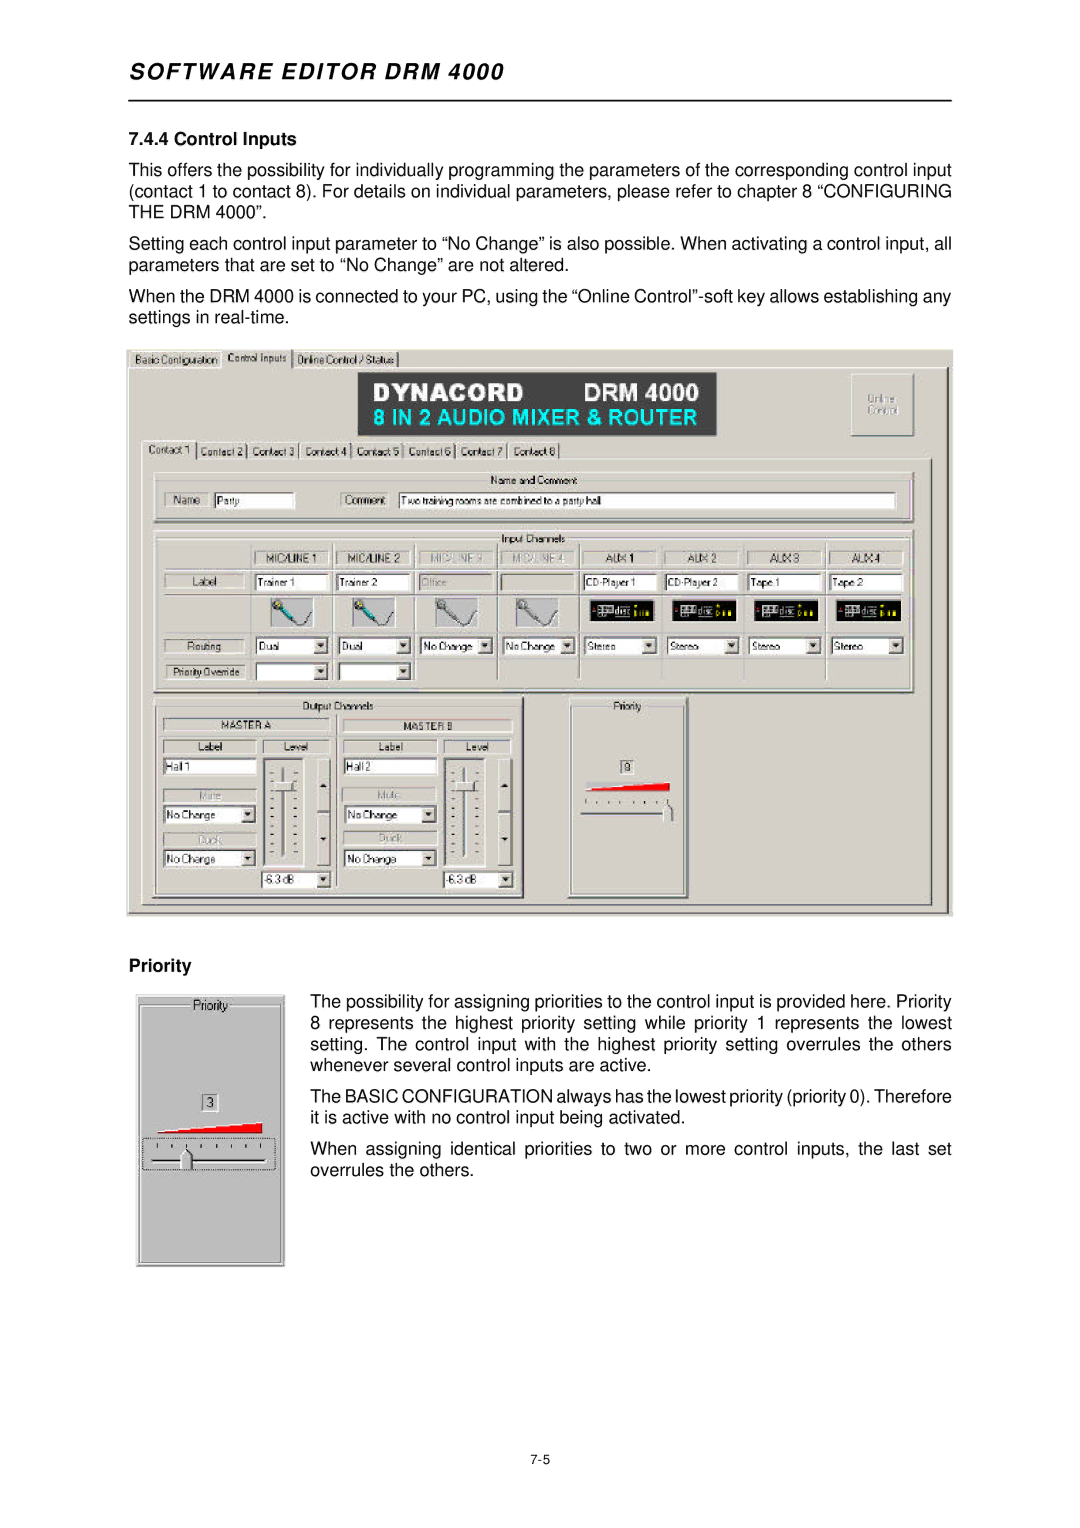 Dynacord DRM 4000 owner manual Control Inputs, Priority 